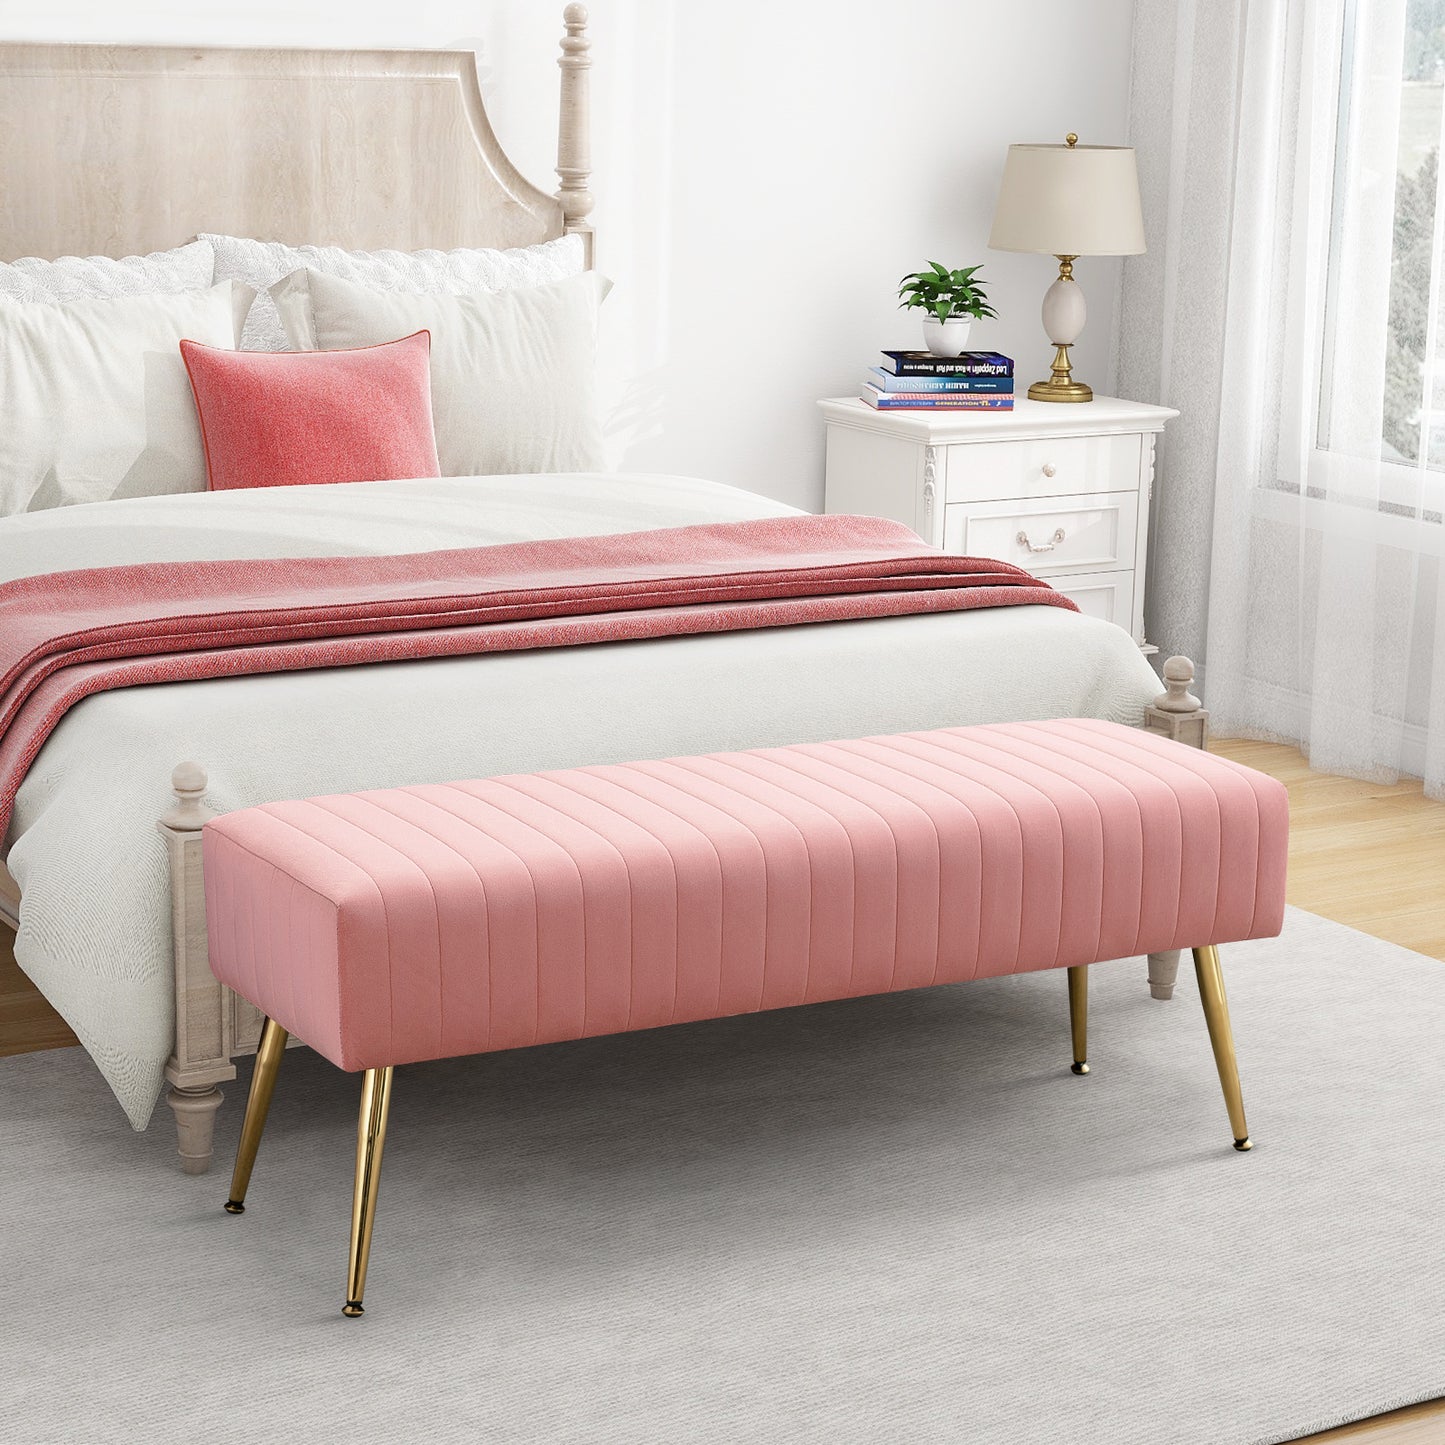 SYNGAR Entryway Bench, Velvet Upholstered Seat Footstool, Rectangular End of Bed Bench with Metal Legs, Ottoman Bench Seat for Bedroom Living Room Hallway, Modern Home Furniture Bed Bench, Pink